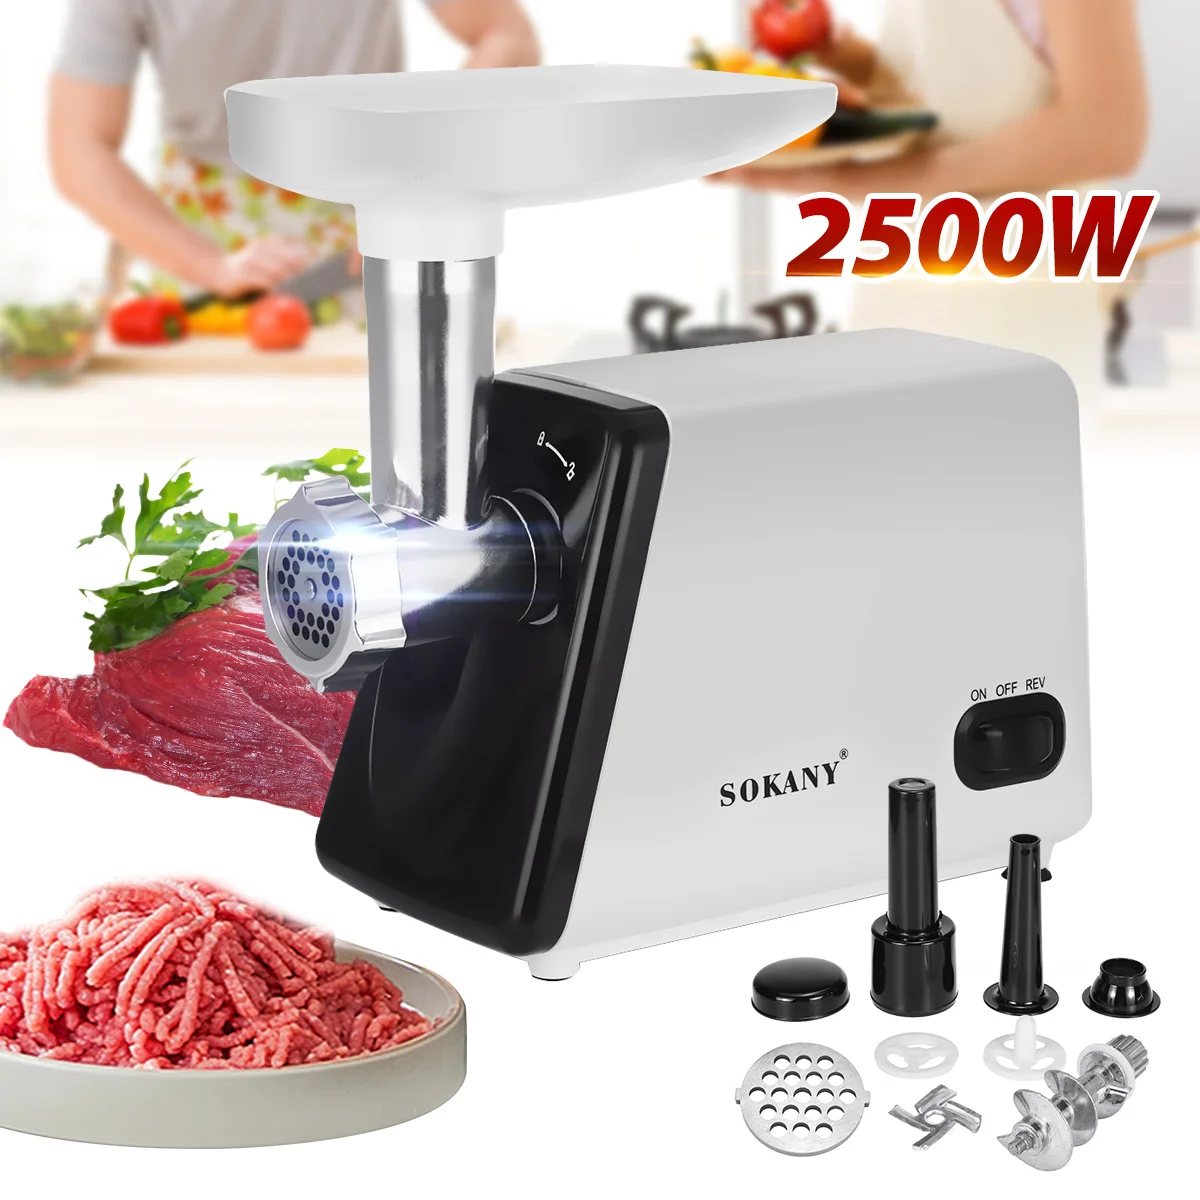 220V Electric Meat Grinder Stainless Steel Powerful Electric Grinder Sausage Stuffer Meat Food Processor for Kitchen Appliance